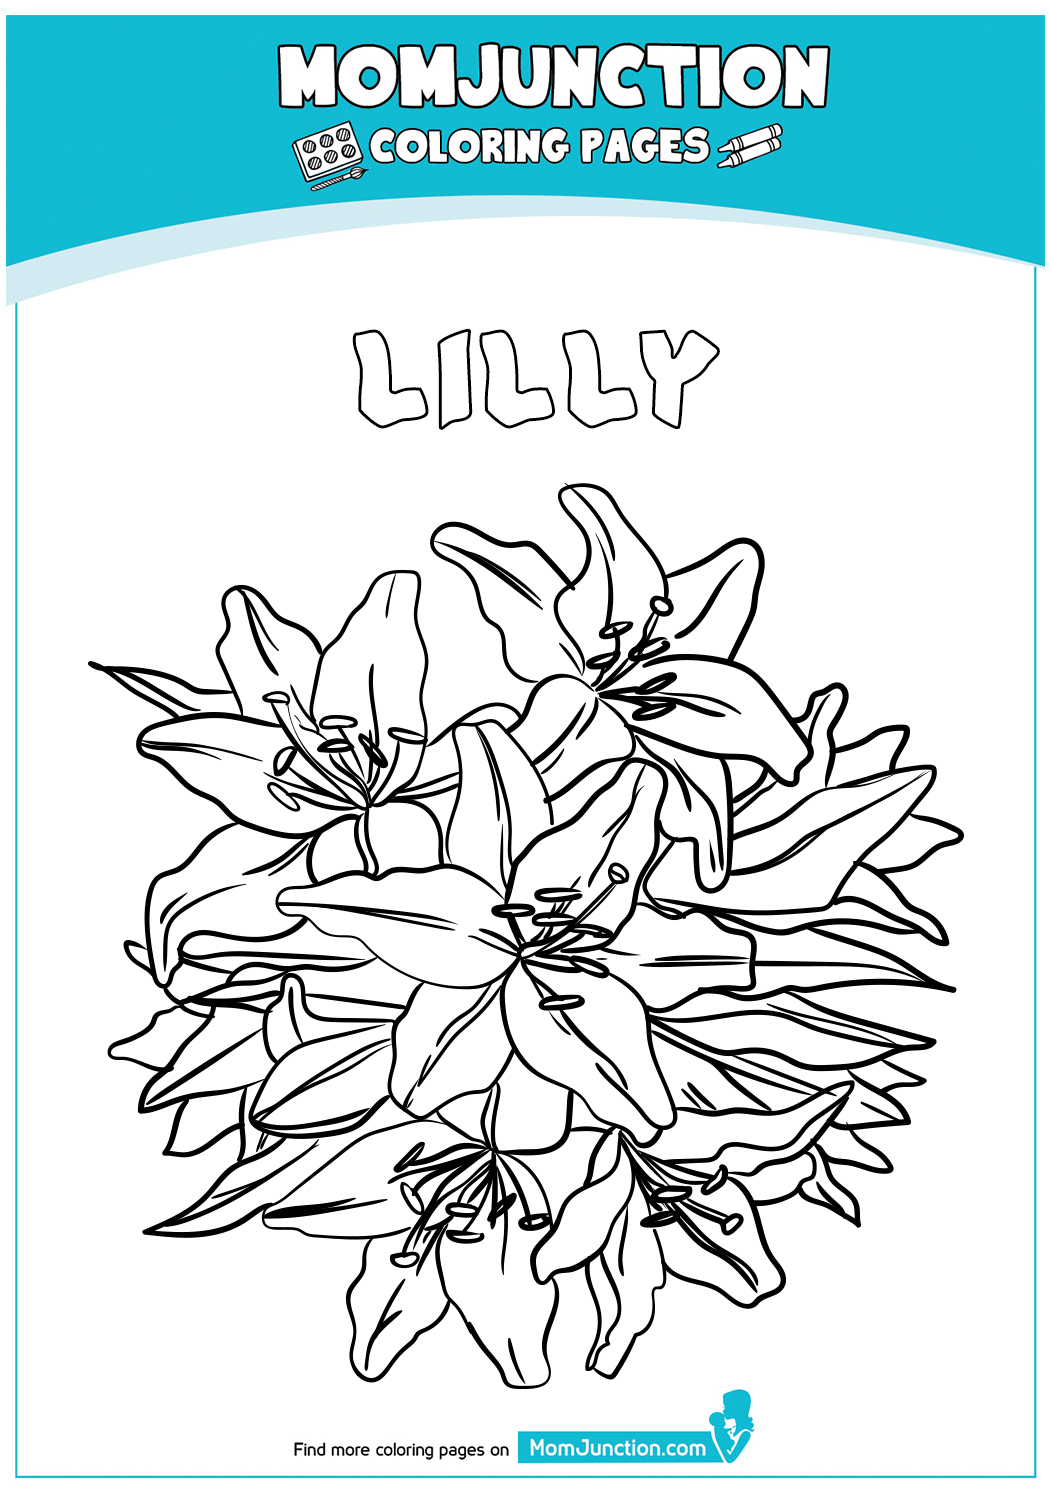 Lilly-18